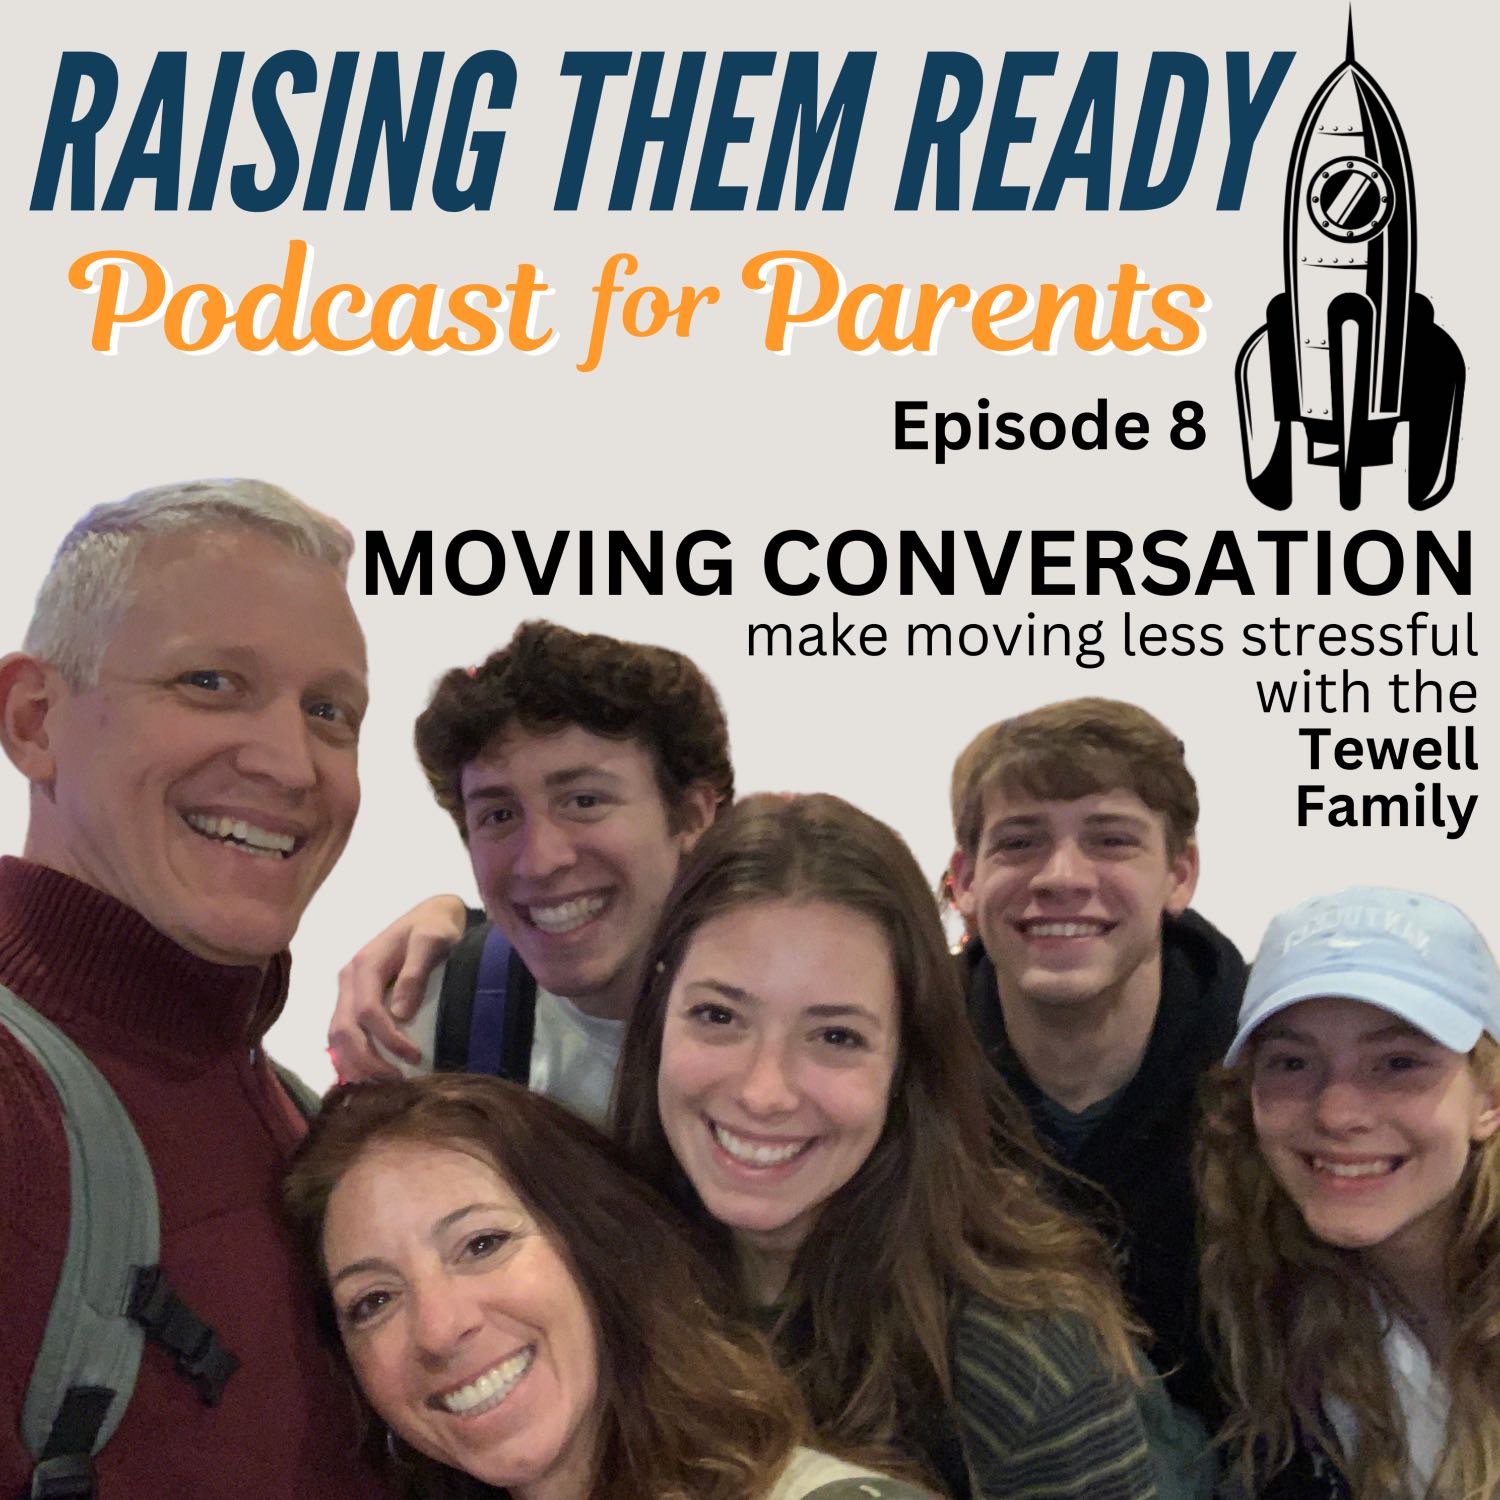 MOVING Conversation, with guest the Tewell family